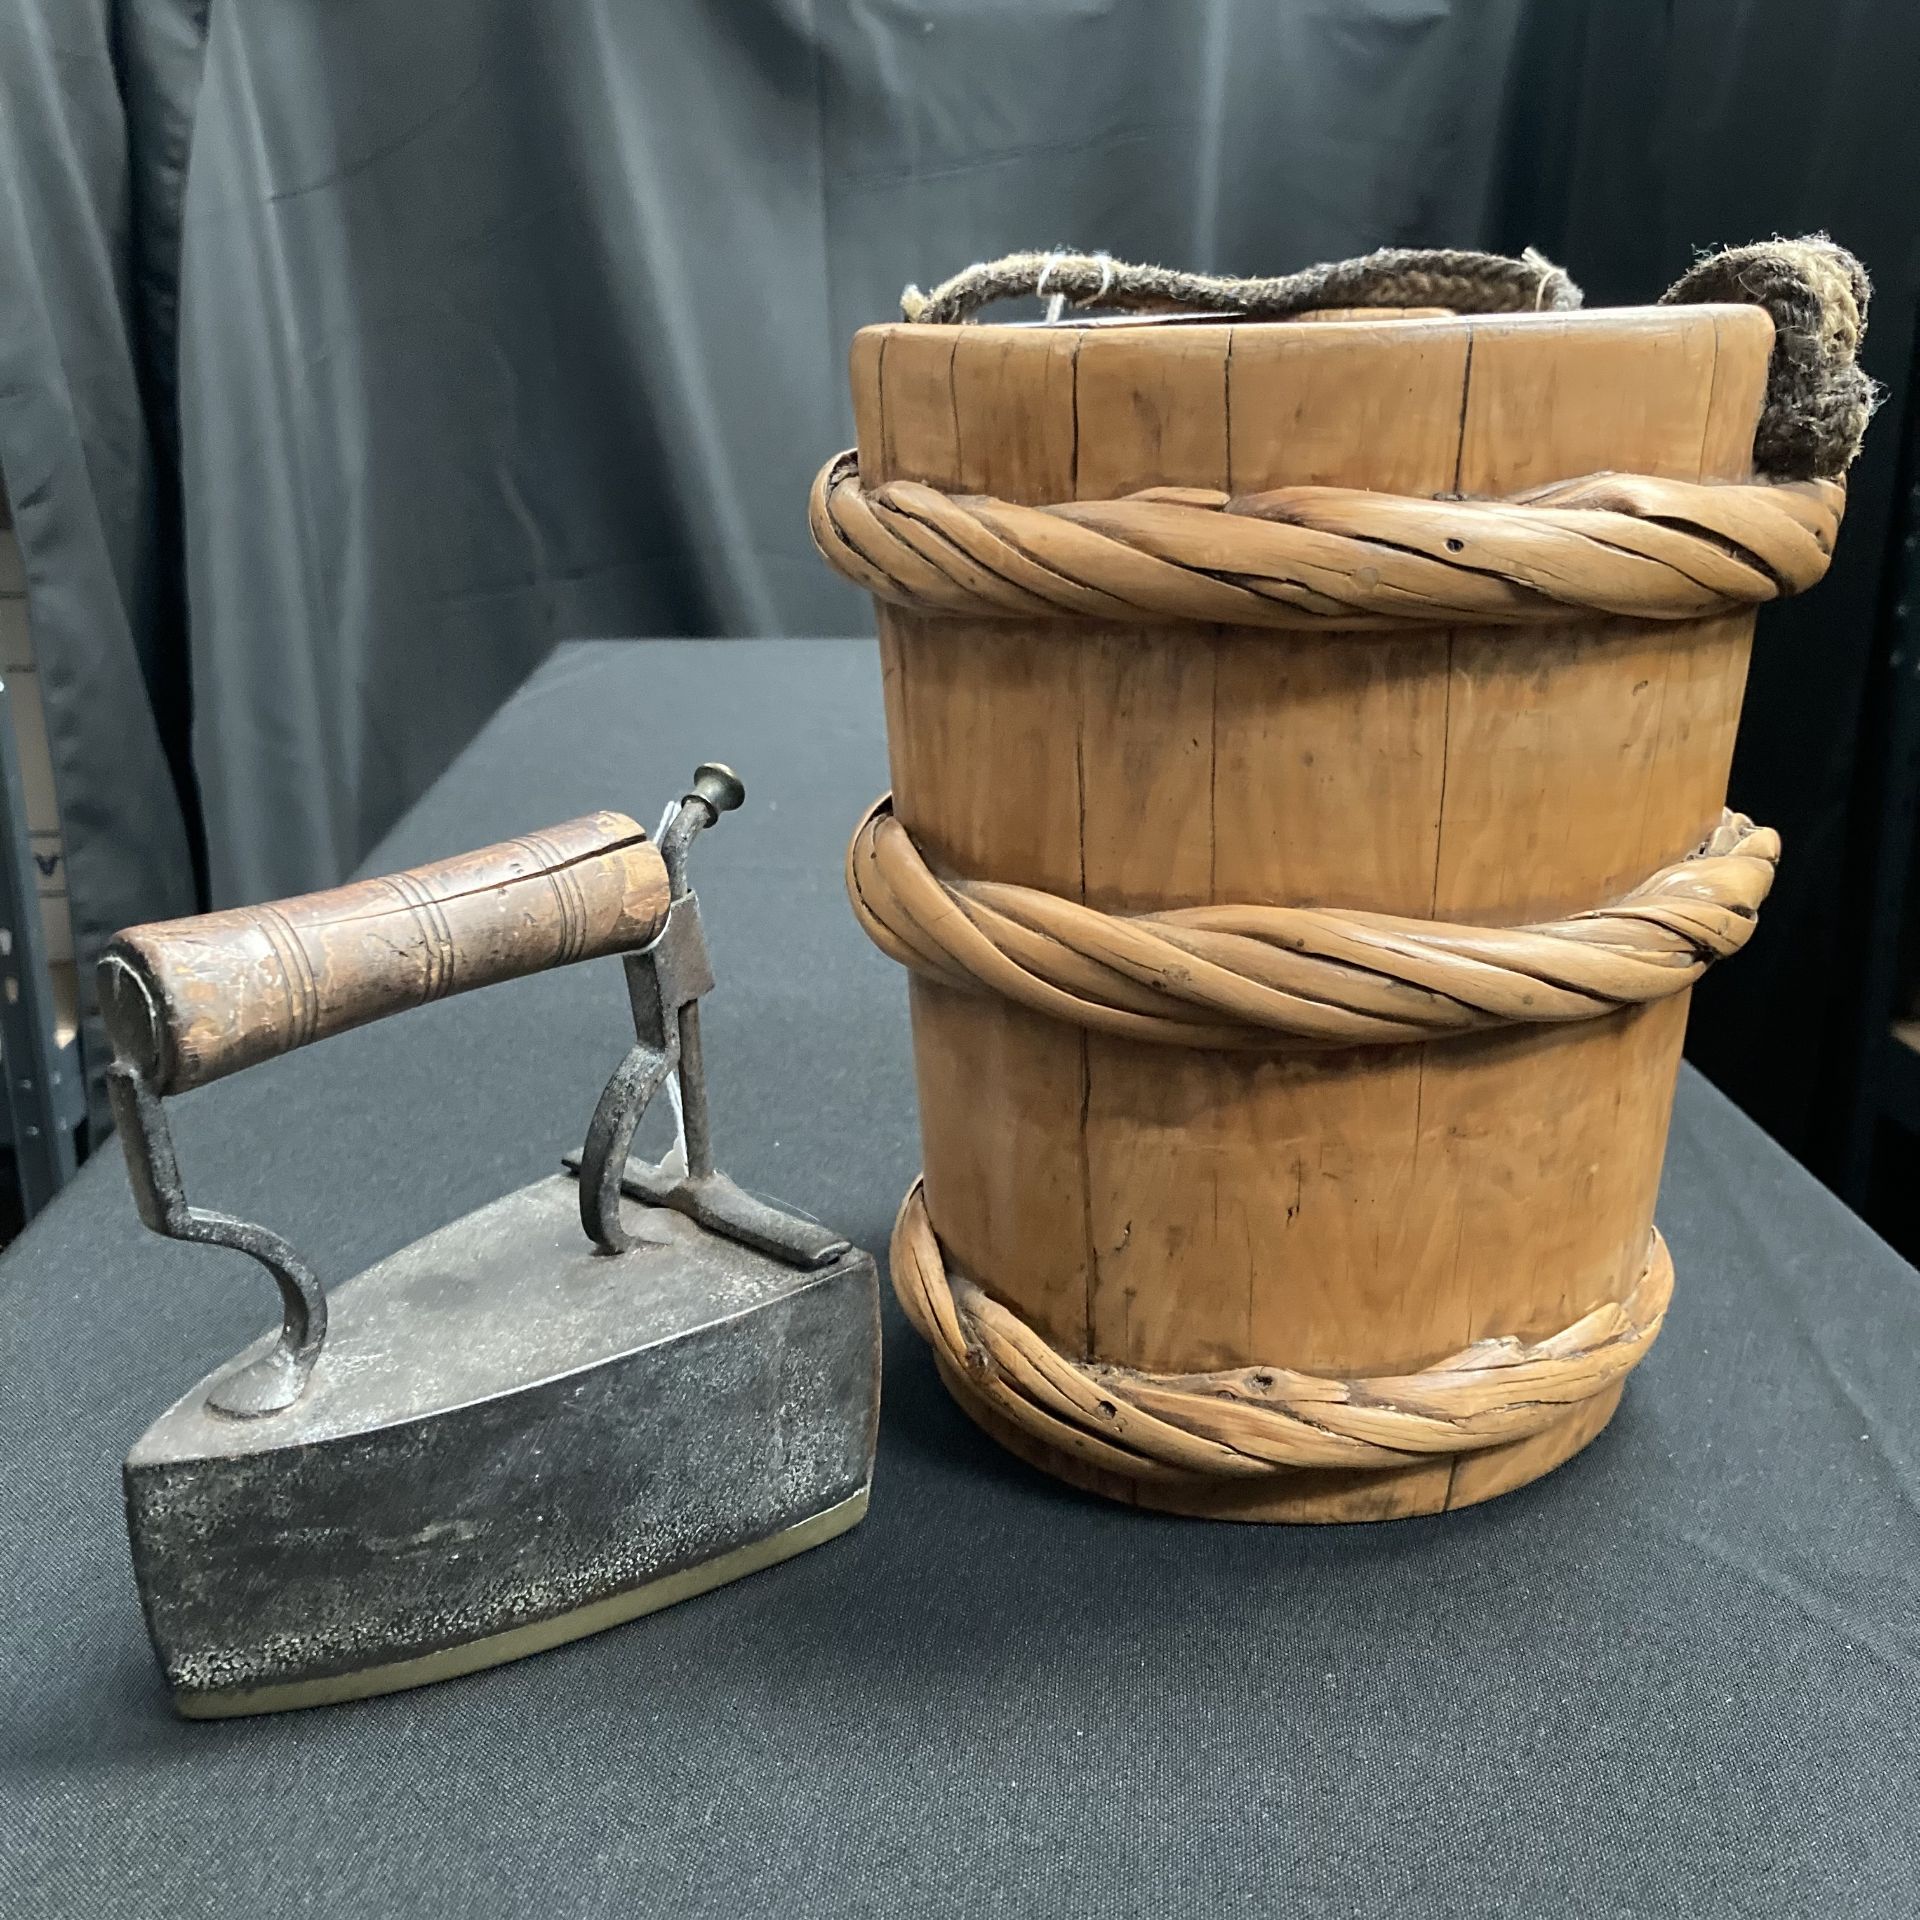 A cane-bound wooden milk pail; and a coal-filled iron